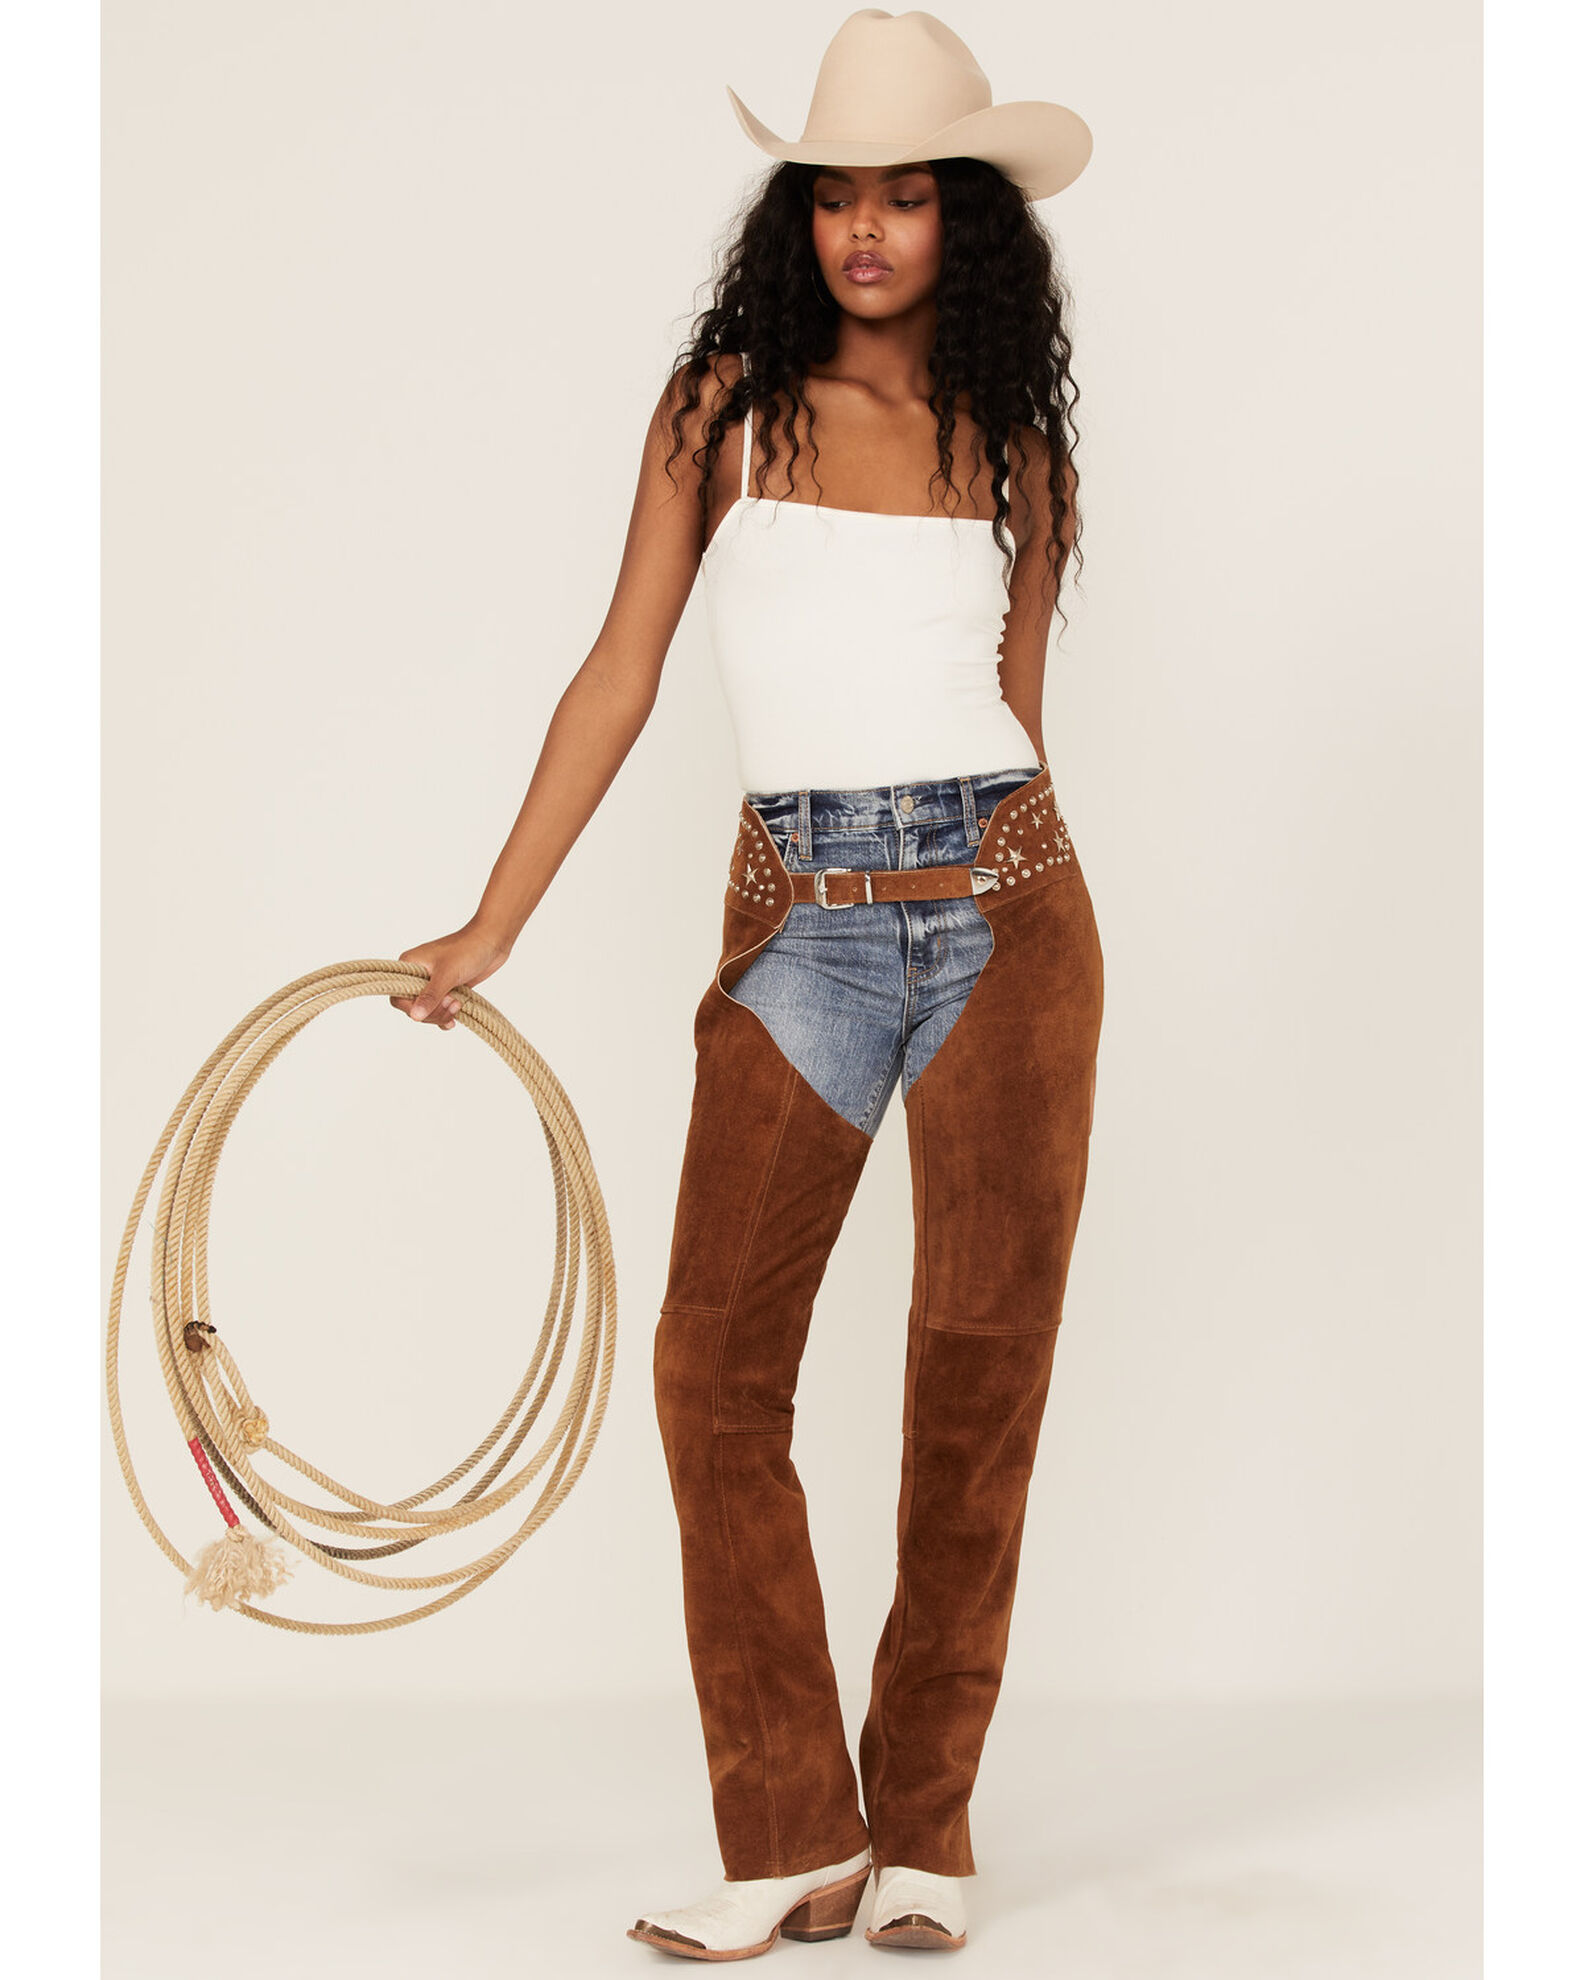 Understated Leather Women's Studded Suede Paris Texas Chaps